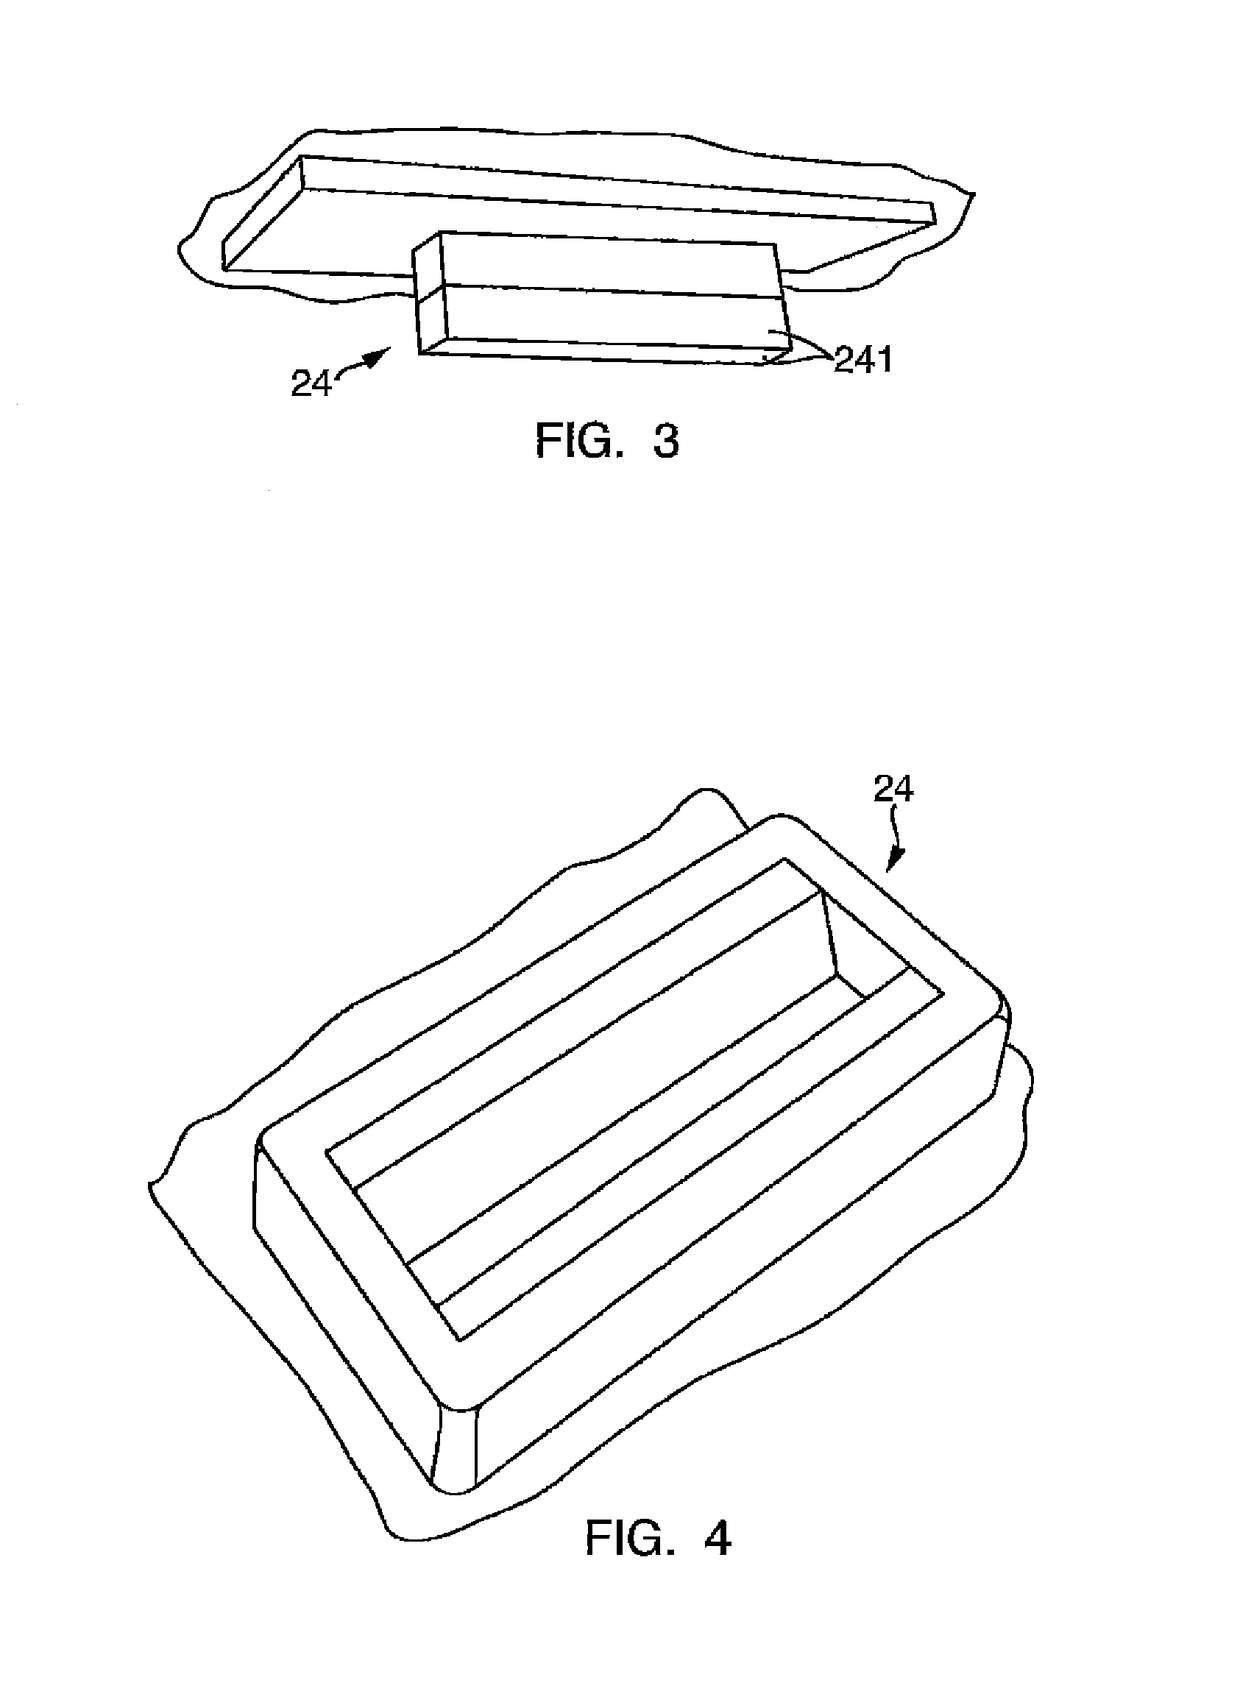 Method of manufacturing a composite insert by molding